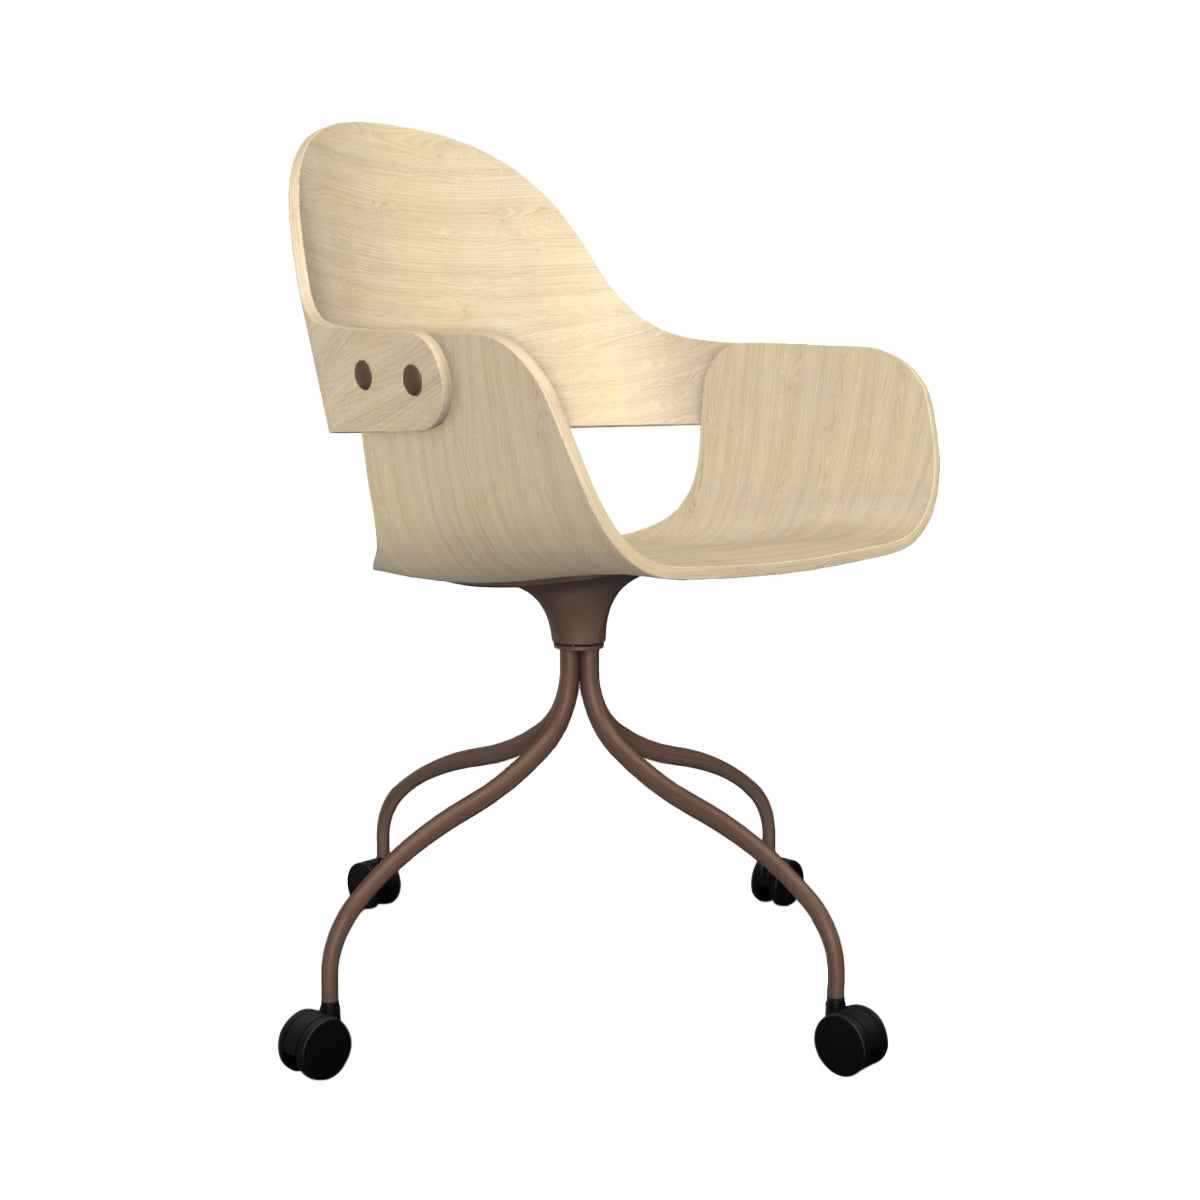 Showtime Nude Chair with Wheel: Natural Ash + Pale Brown